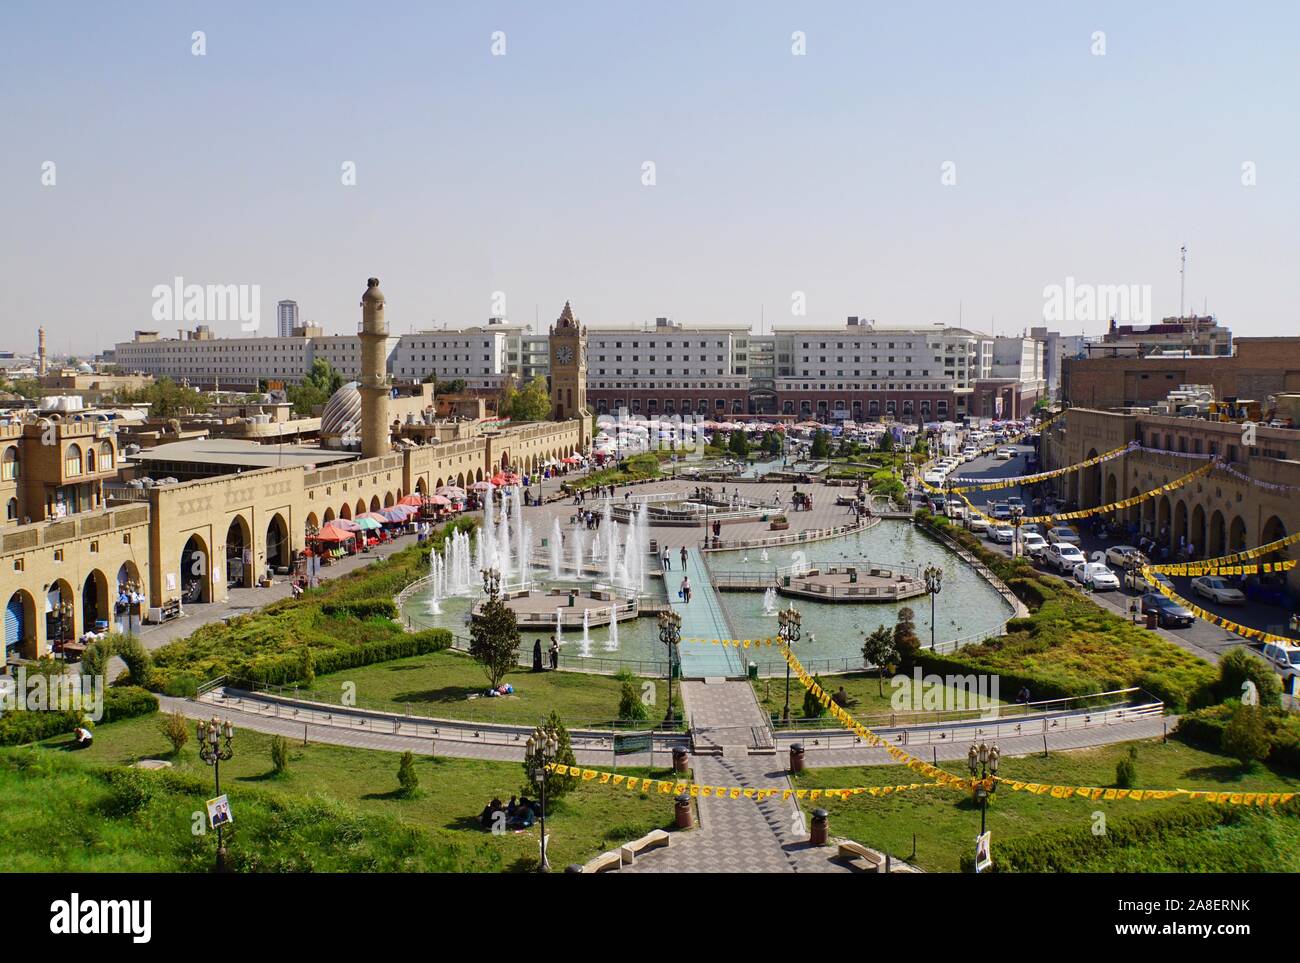 View of the Main Square of Erbil in Iraq Stock Photo